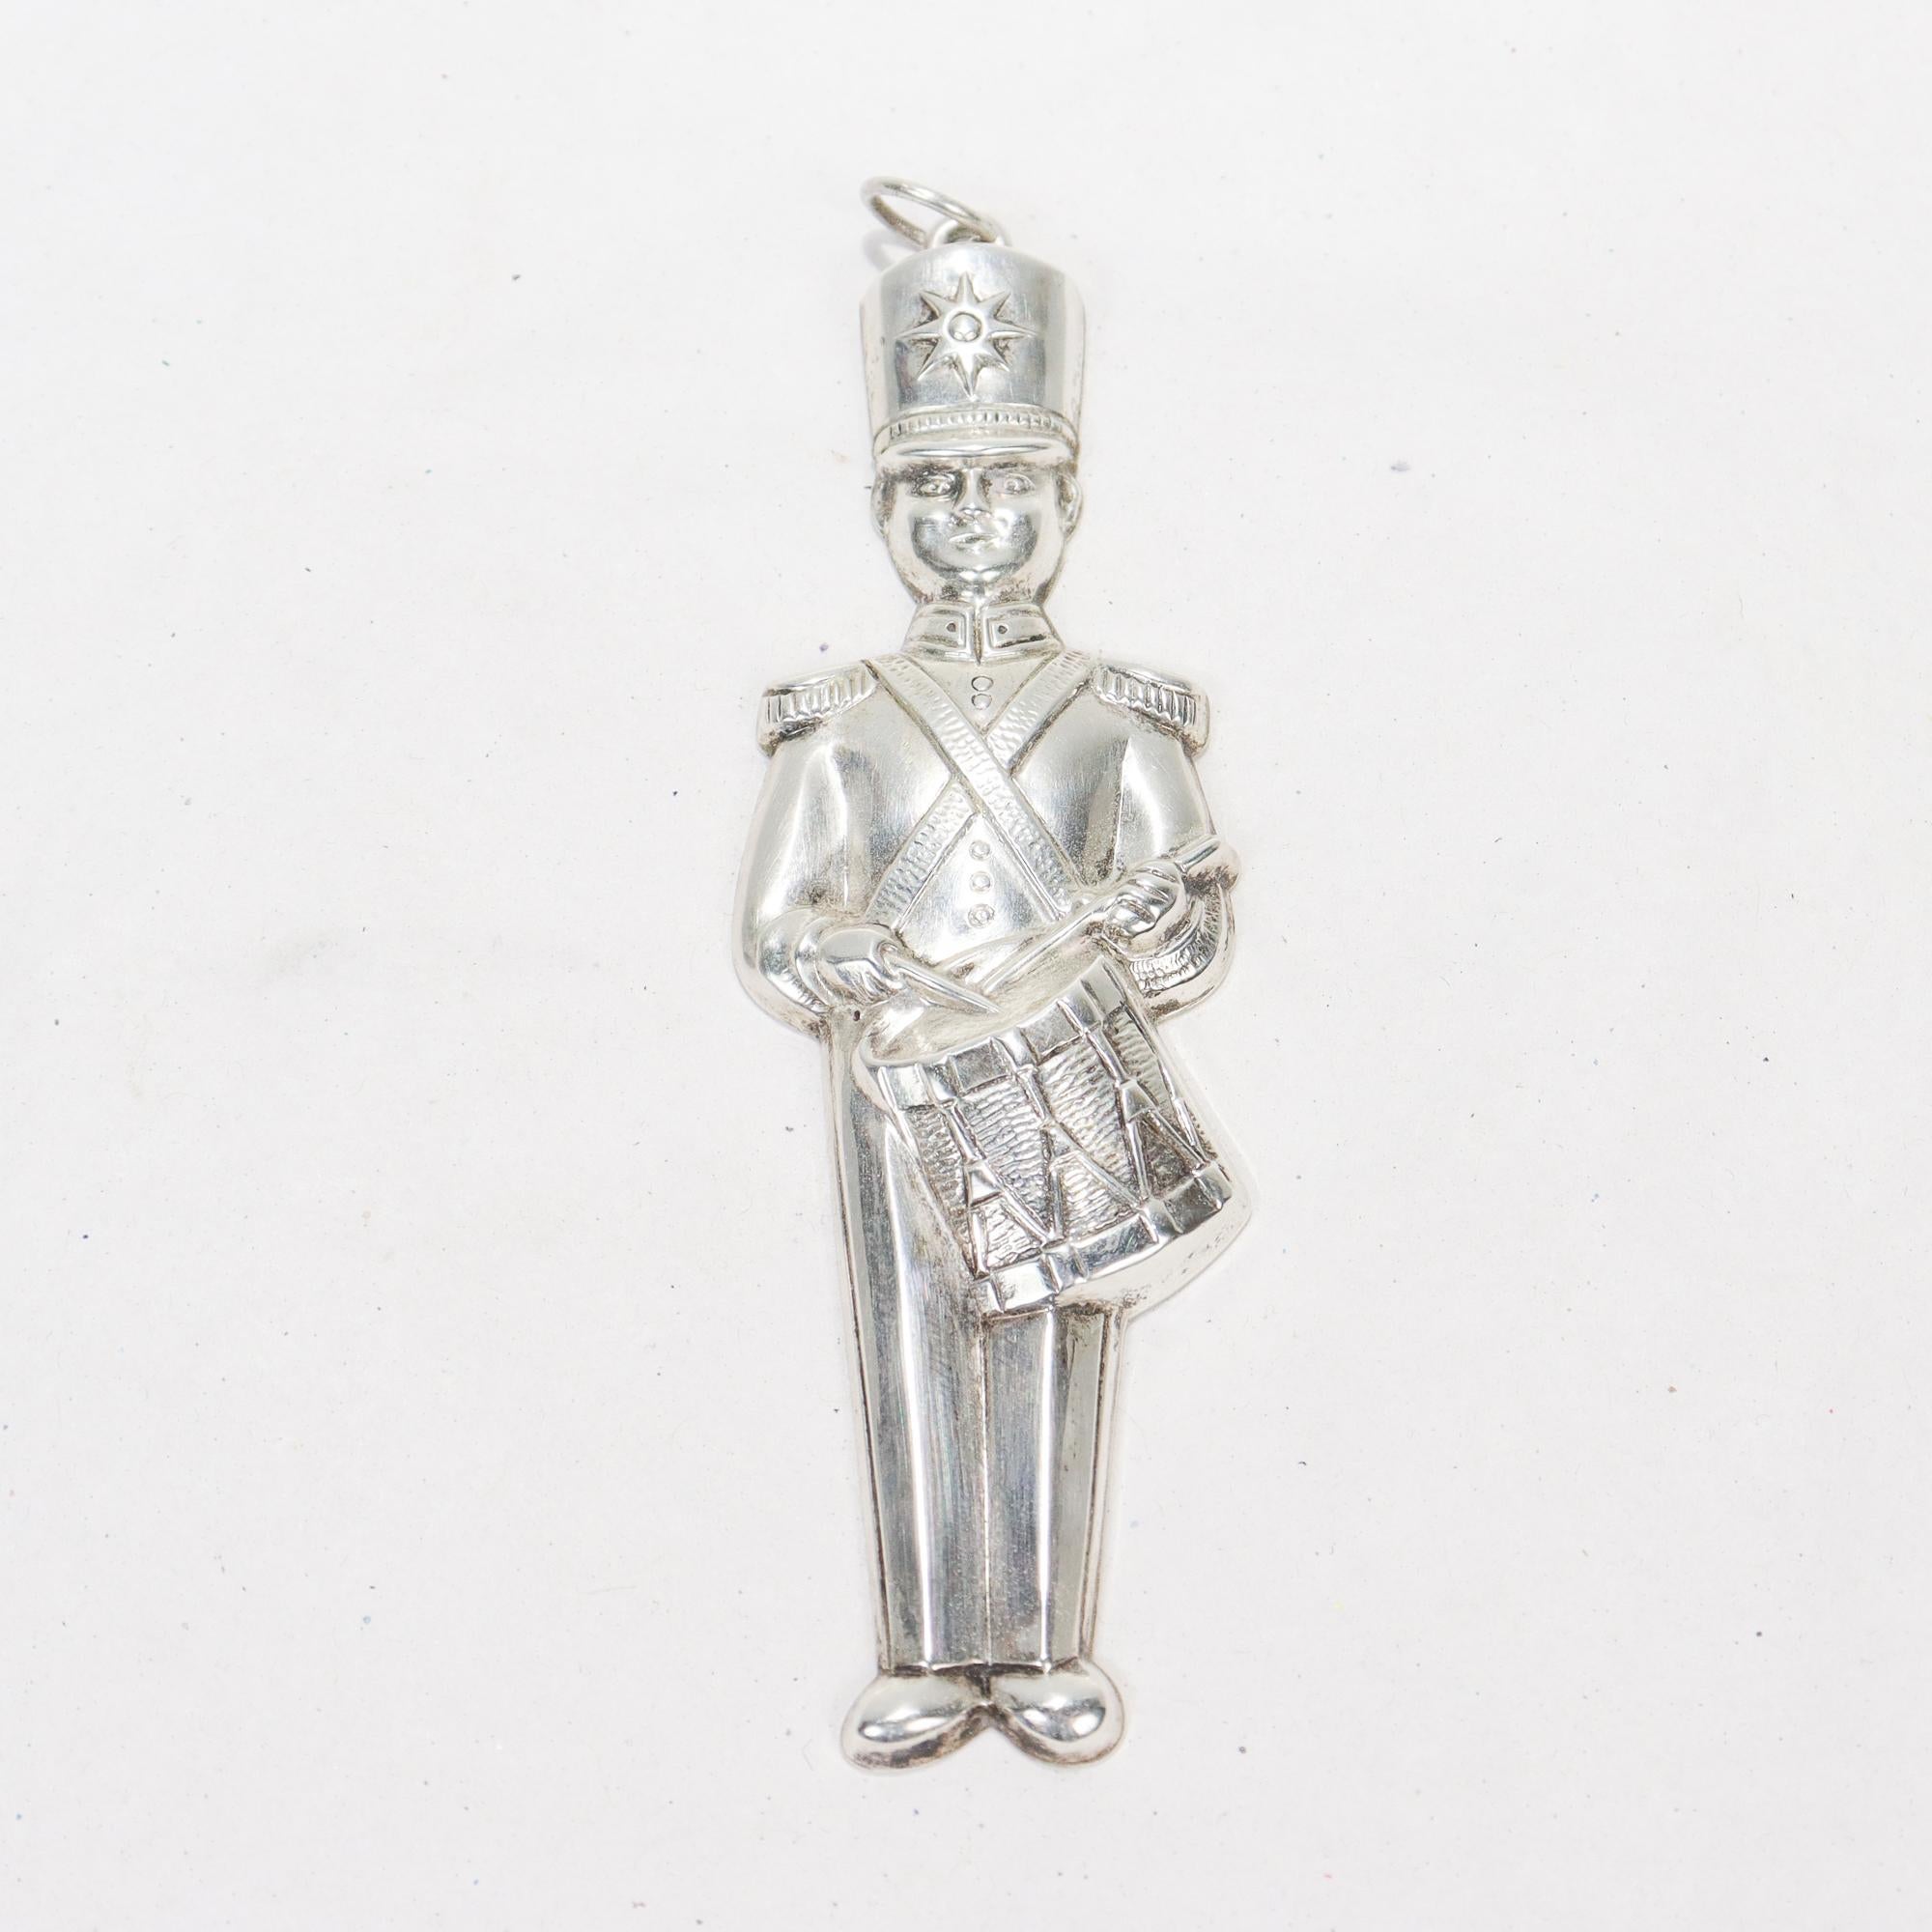 A fine vintage Christmas ornament of a drummer.

By Gorham Co.

In sterling silver.

Model no. 80.

In the form of a (toy?) soldier playing the snare drum. Set with a bail for hanging attached to the top of his hat.

Simply a great sterling silver